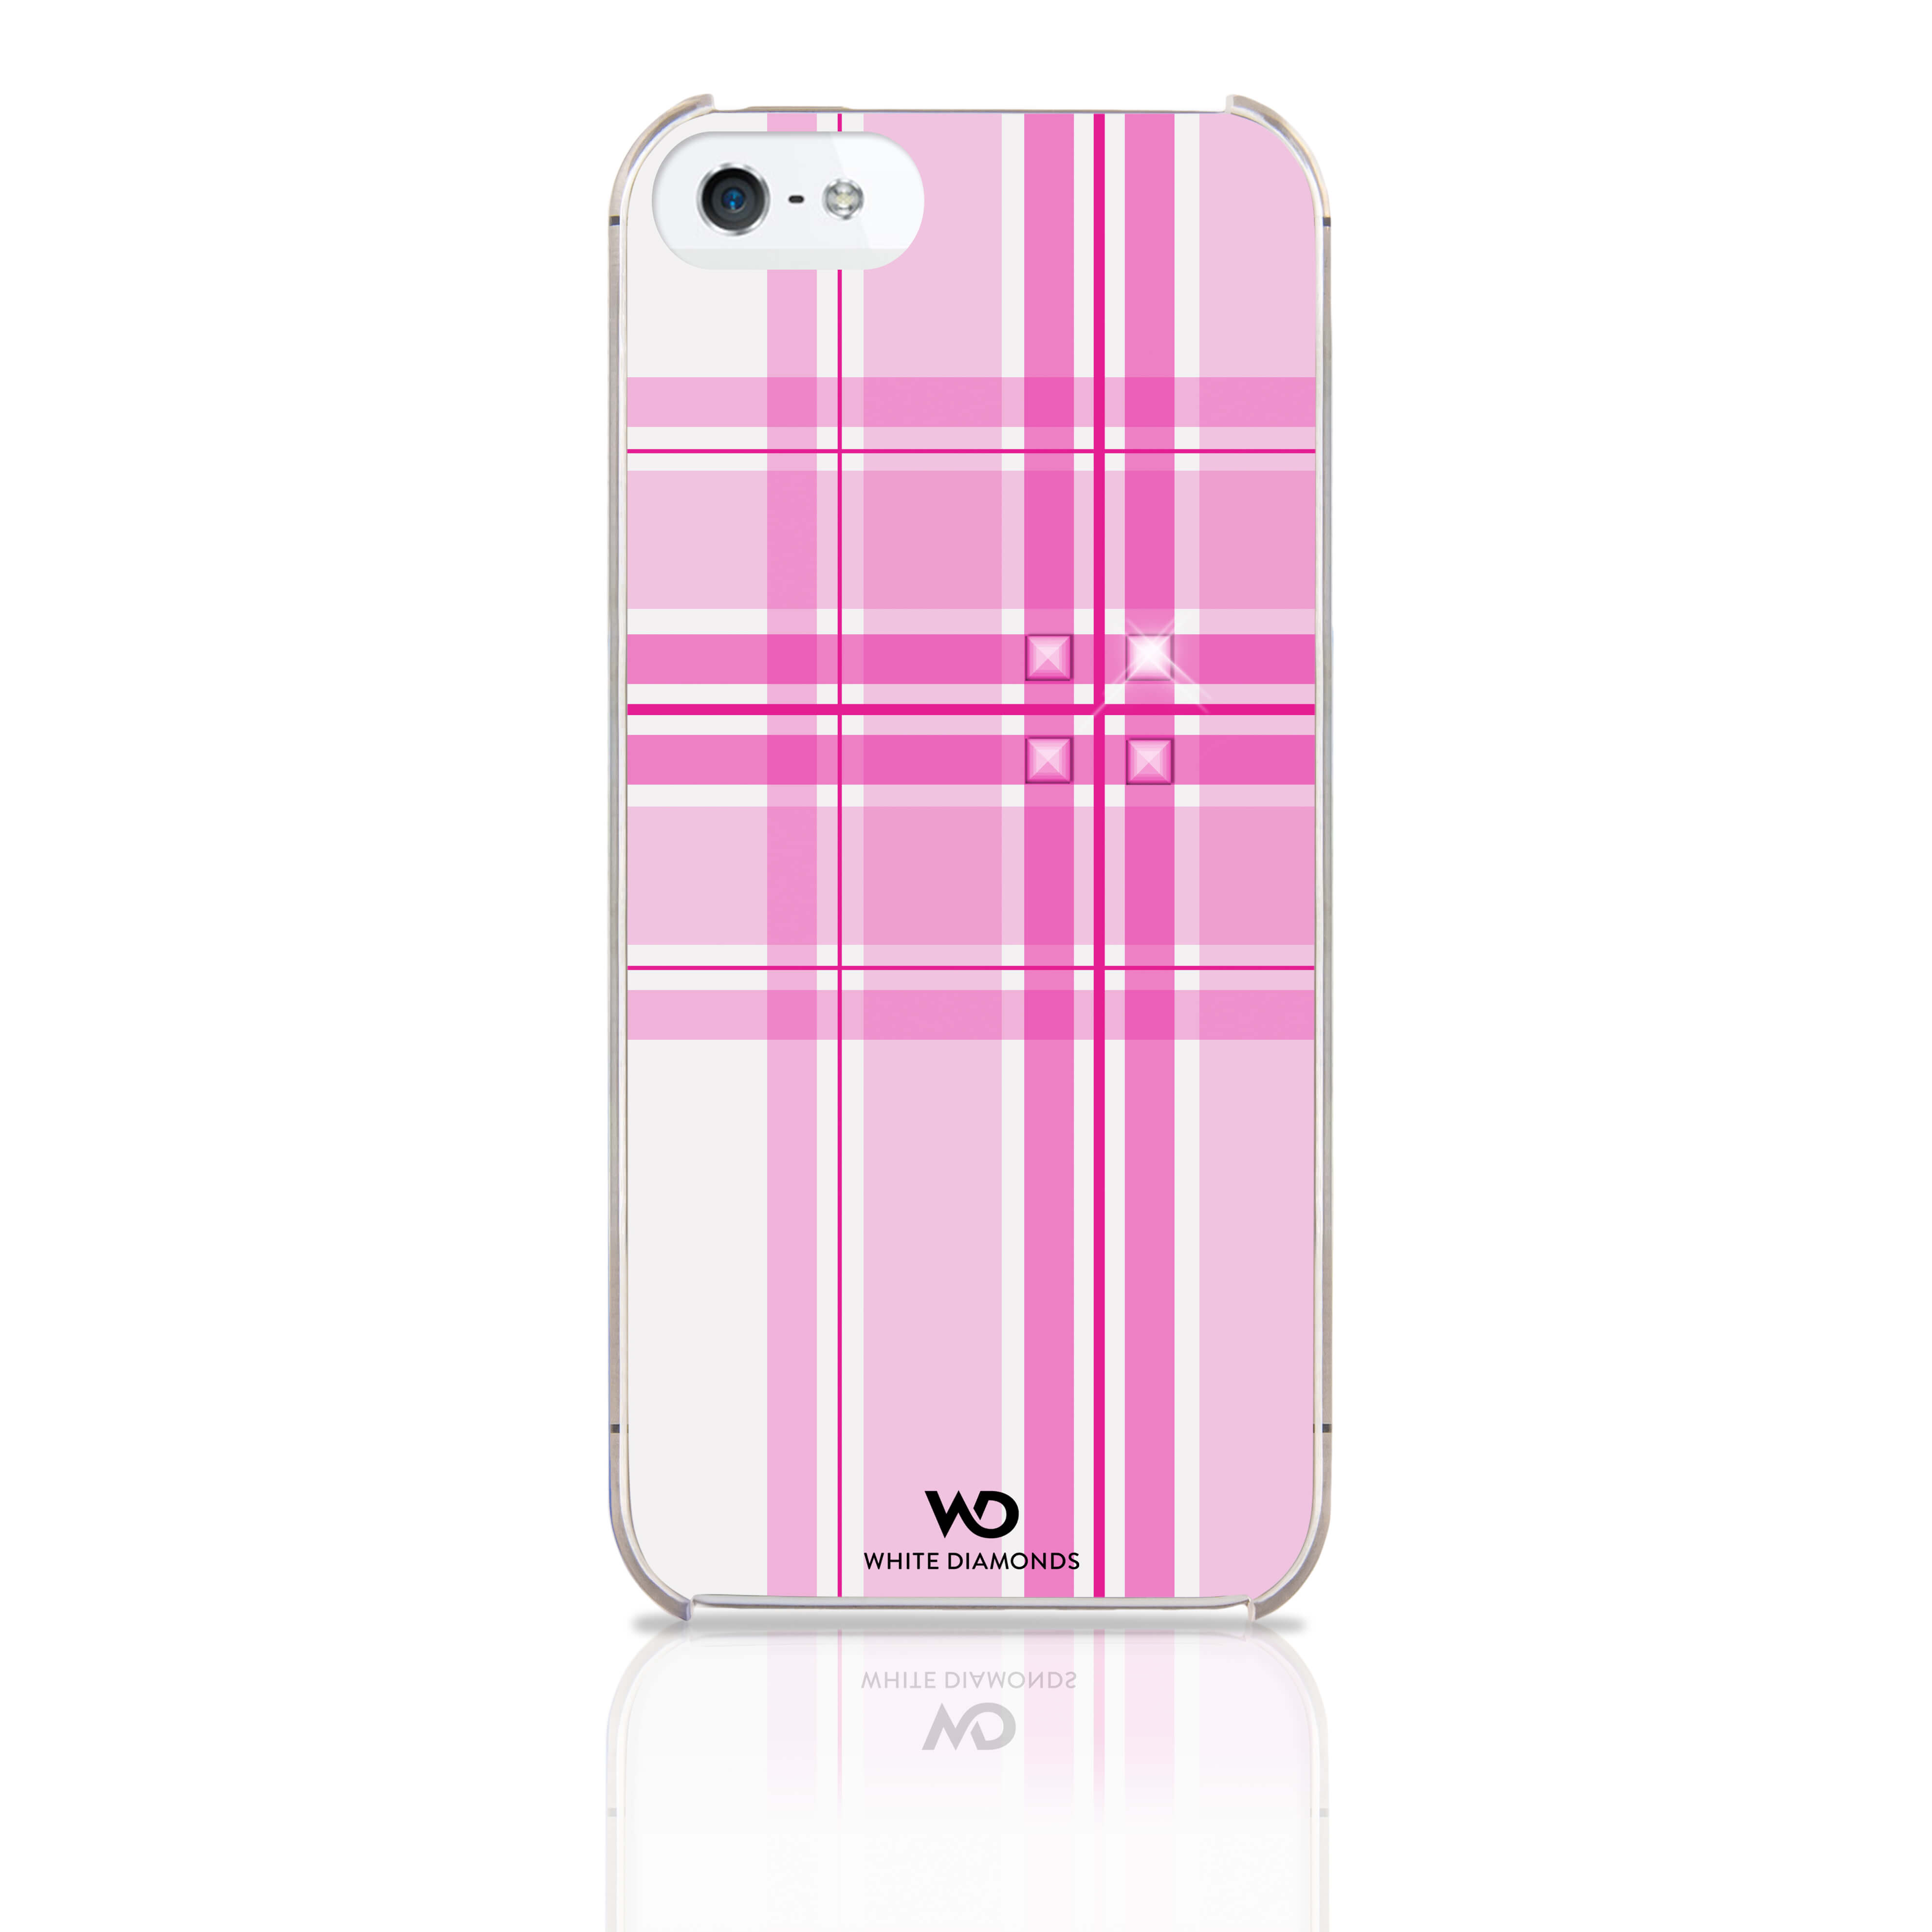 Knox Mobile Phone Cover for A pple iPhone 5/5s, pink